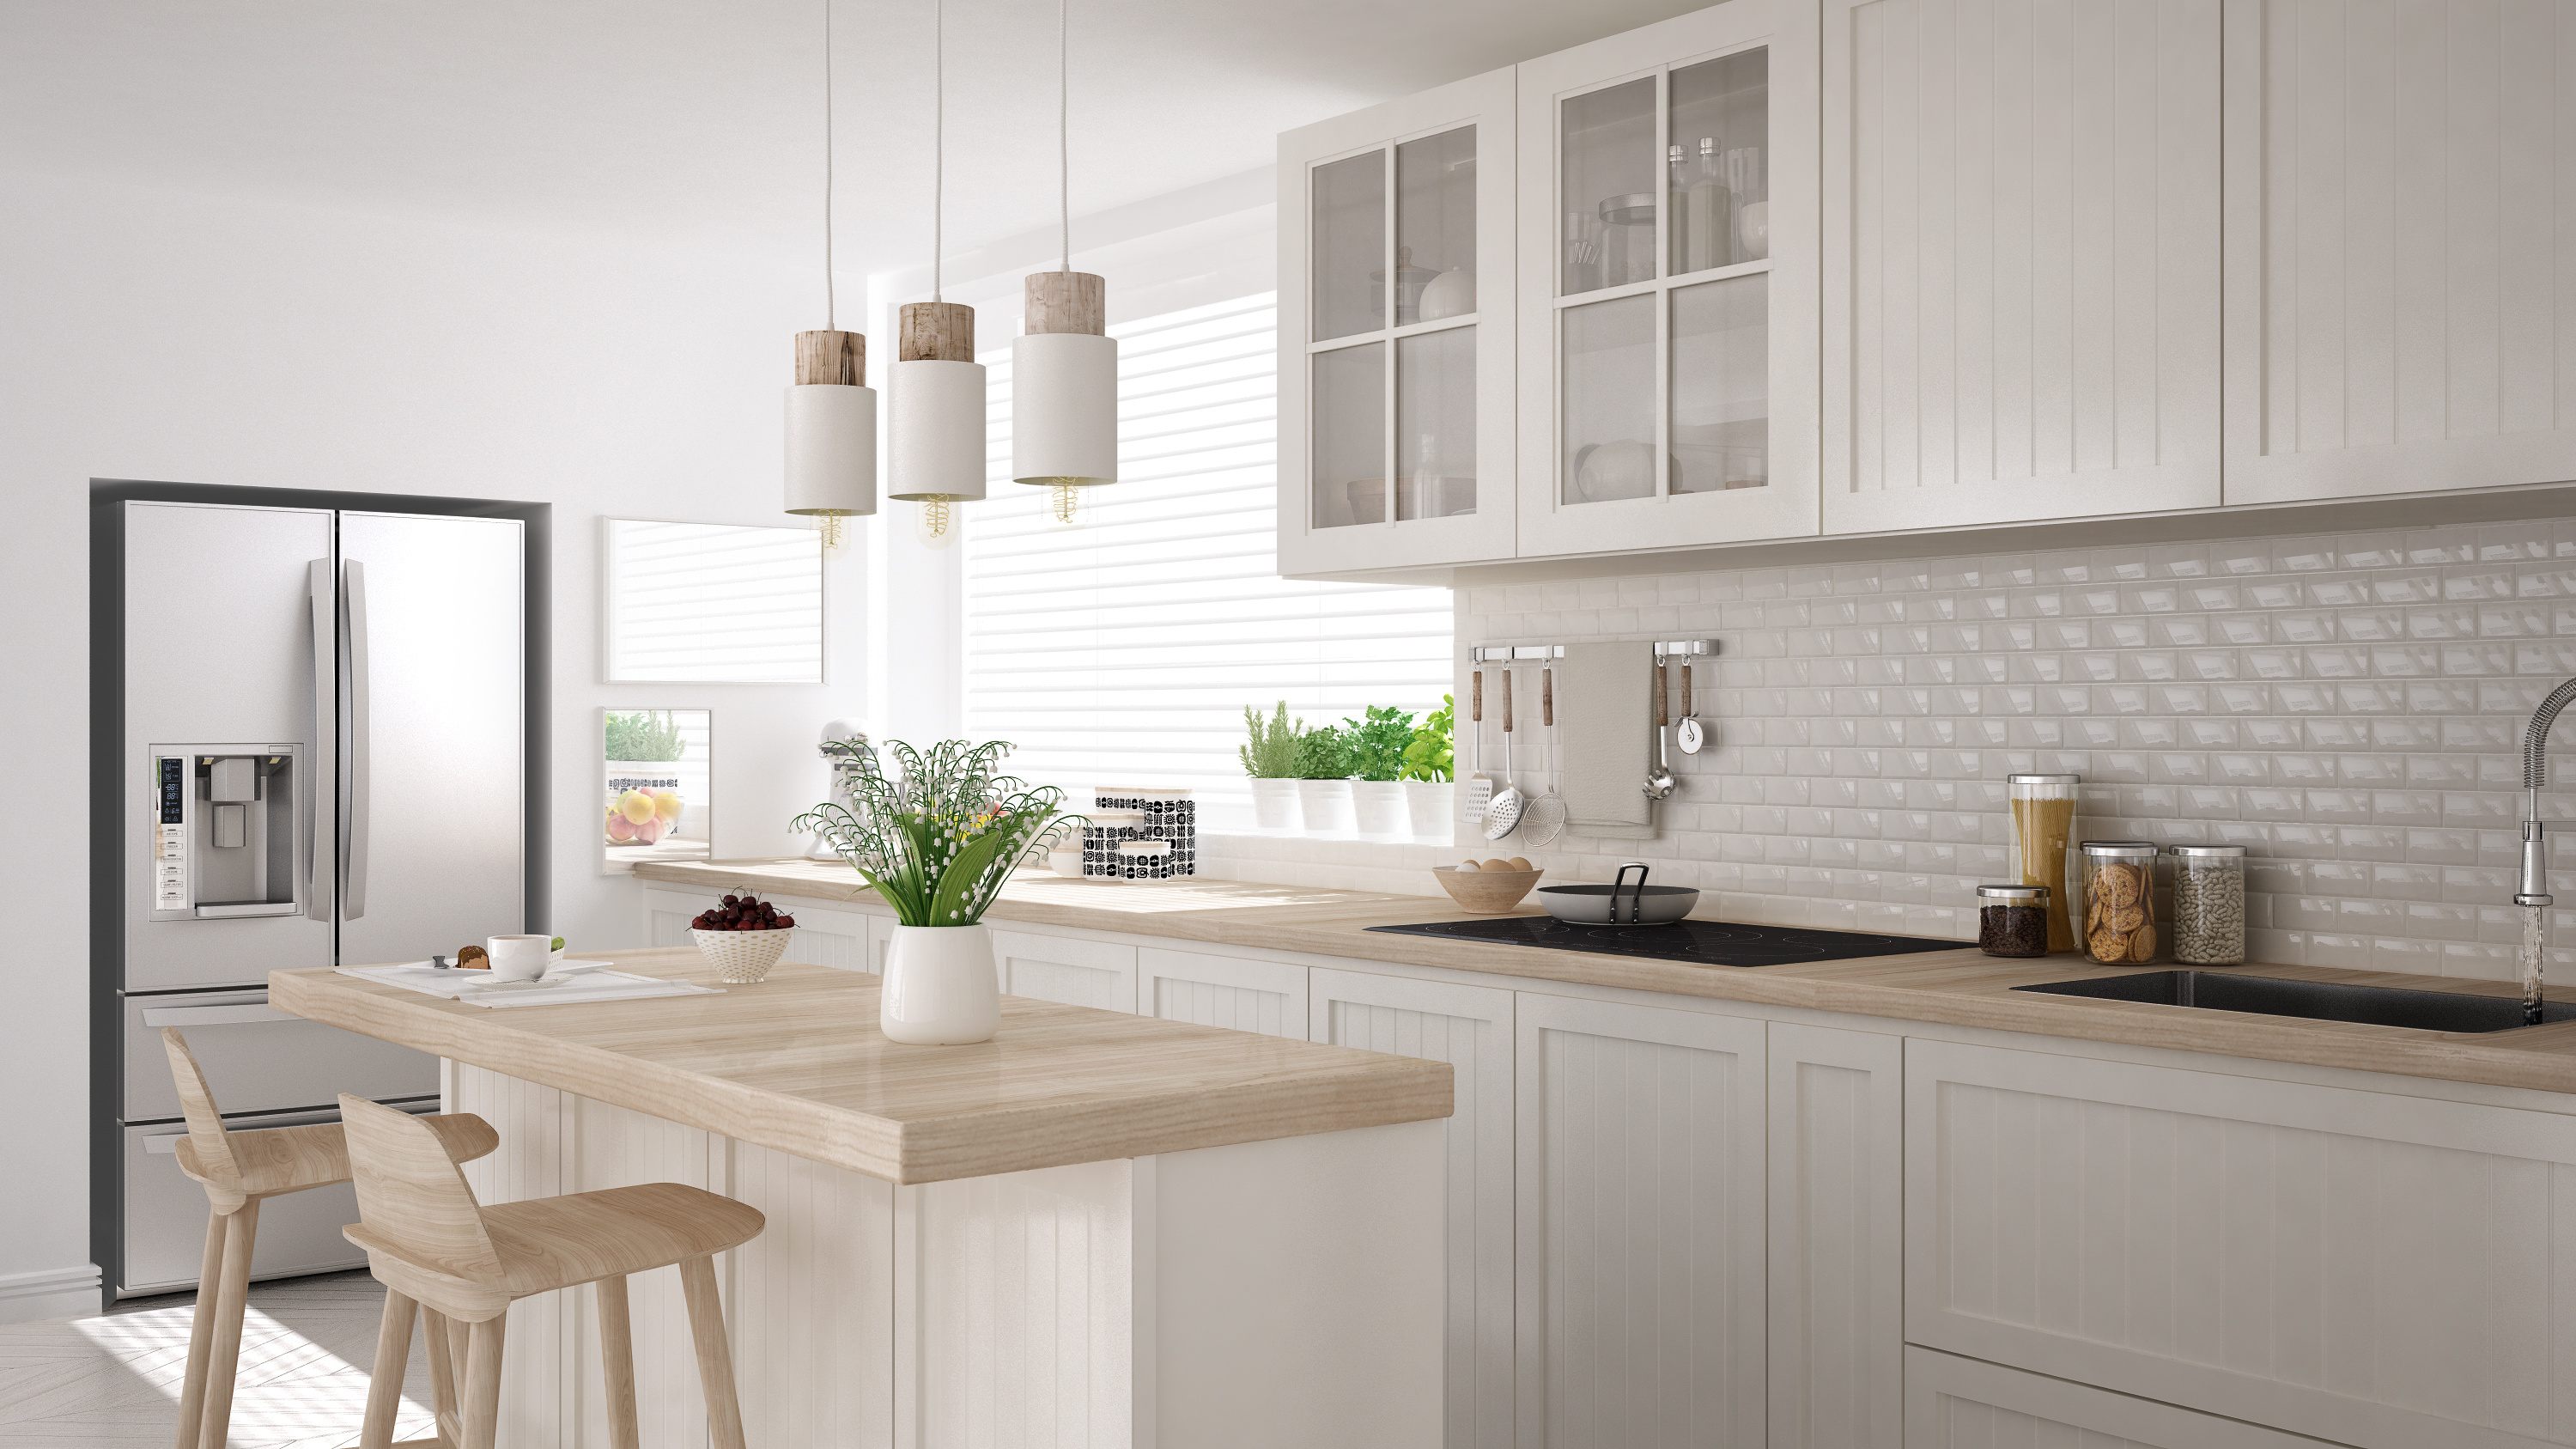 Scandinavian classic kitchen with wooden and white details, minimalistic interior design team logue